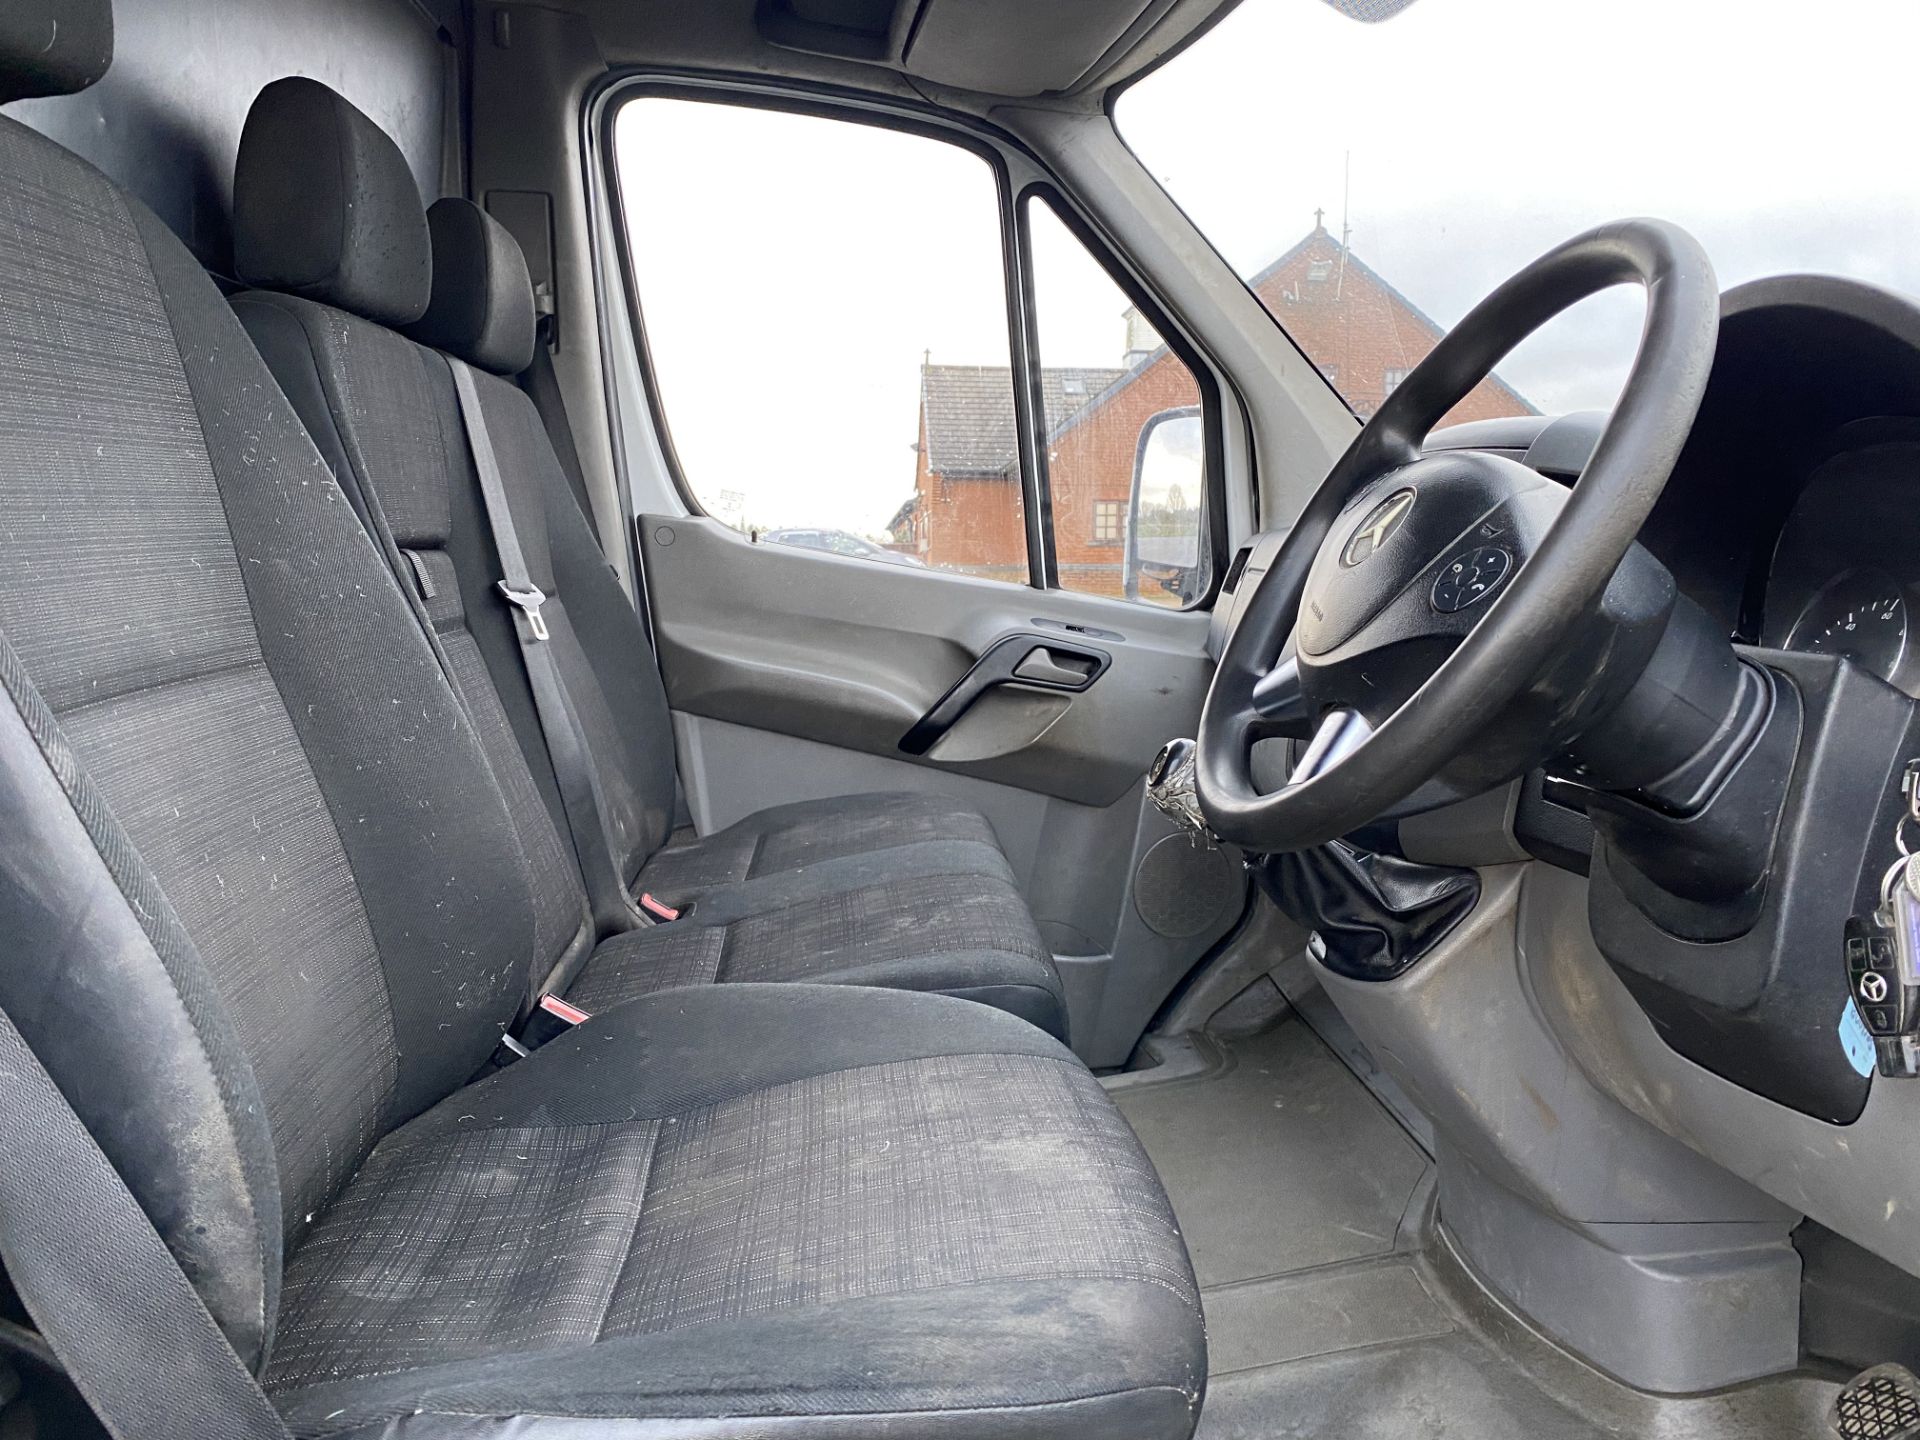 (ON SALE) MERCEDES SPRINTER 313CDI MWB HIGH ROOF-14 REG- 1 OWNER -LOW MILES -1 KEEPER- NEW SHAPE - Image 7 of 13